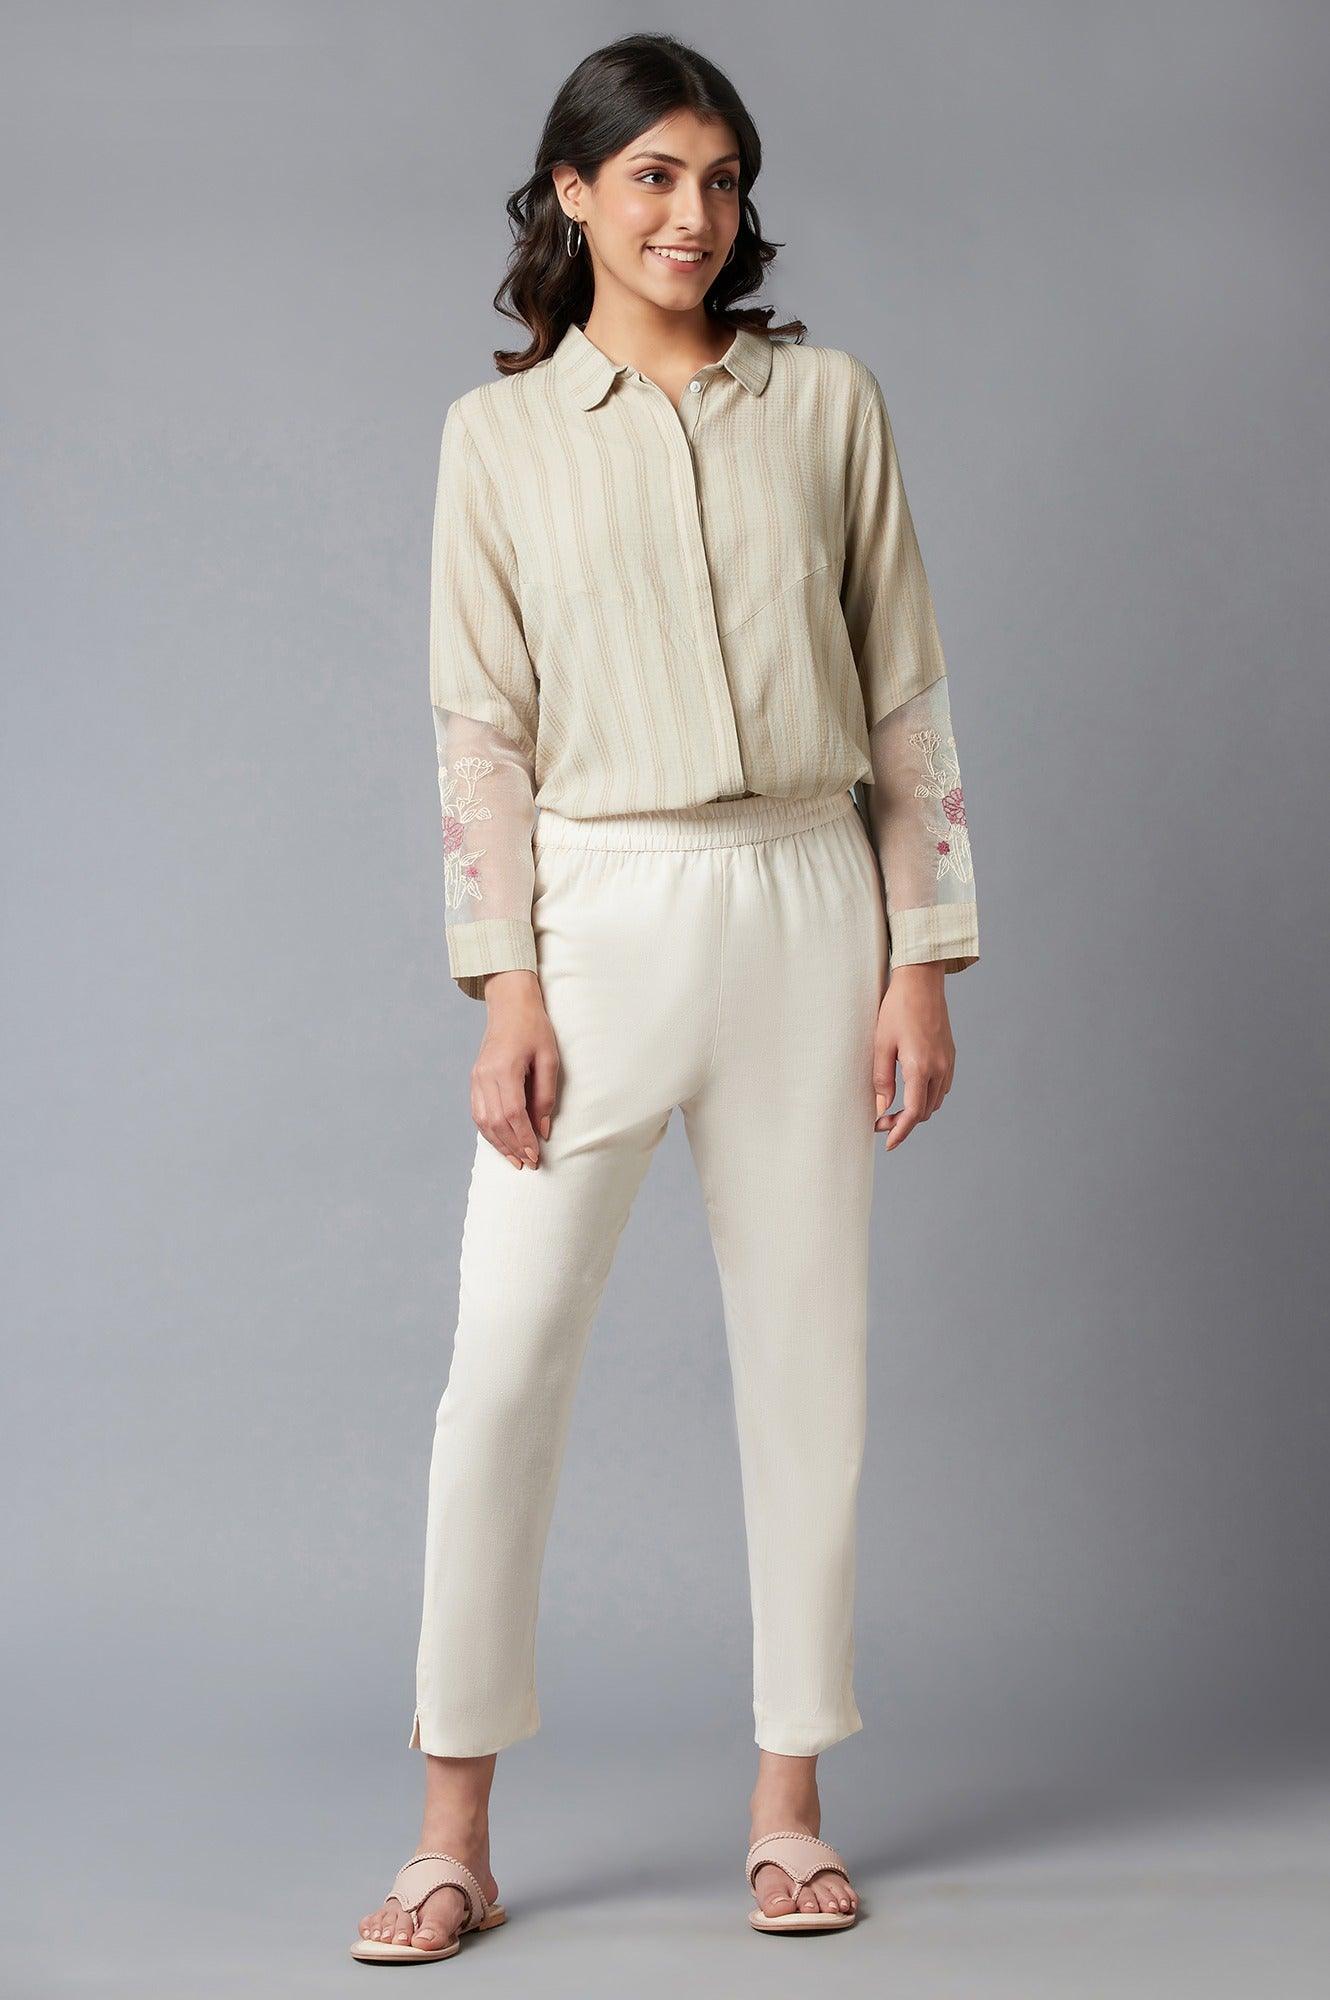 Beige Textured Shirt With Embroidered Sleeves - wforwoman